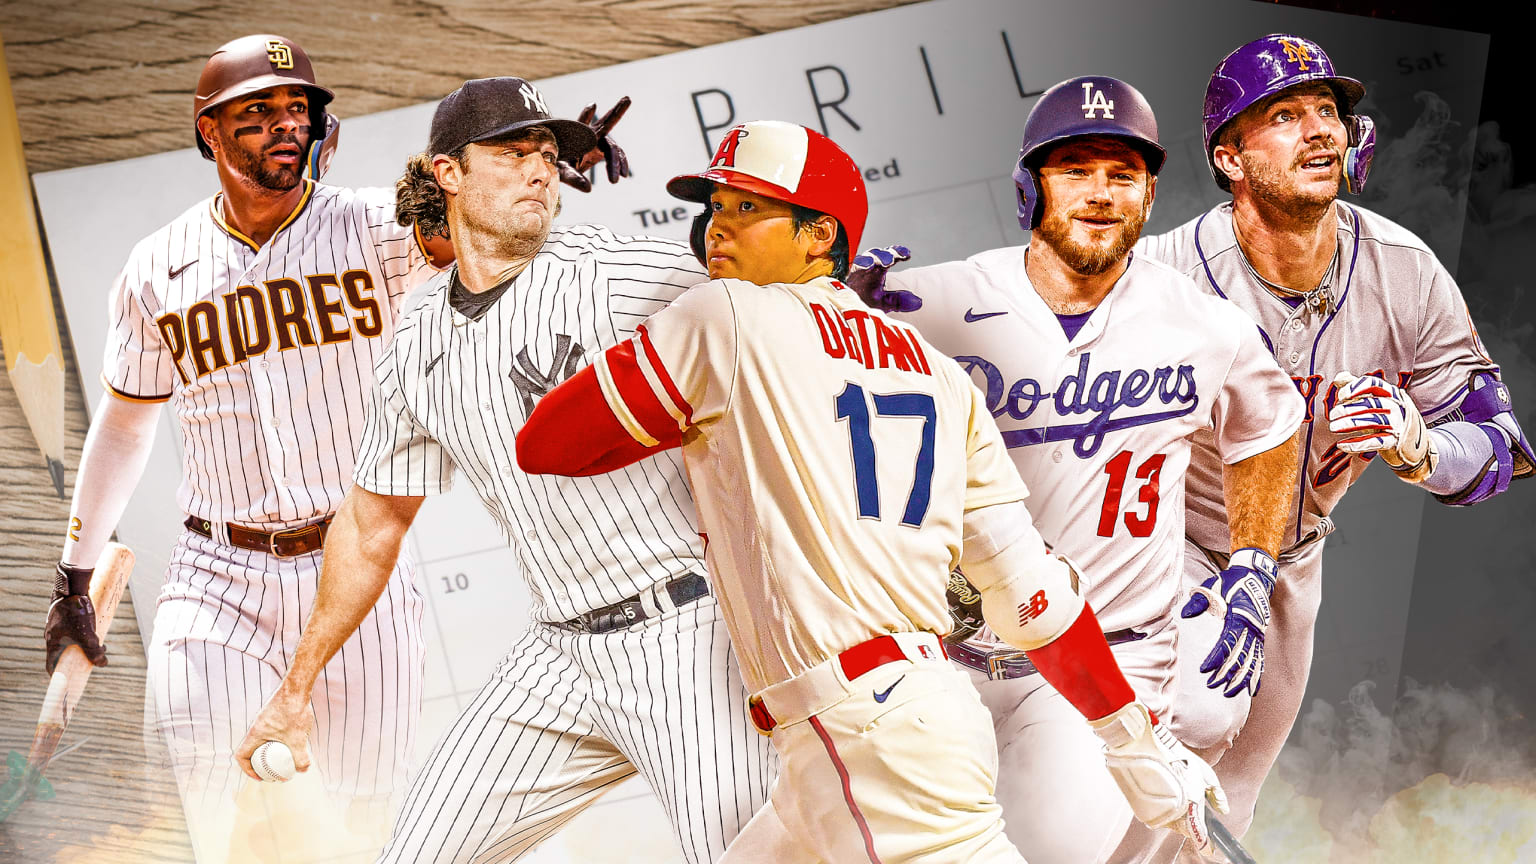 Xander Bogaerts, Gerrit Cole, Shohei Ohtani, Max Muncy and Pete Alonso are pictured in front of a calendar for the month of April